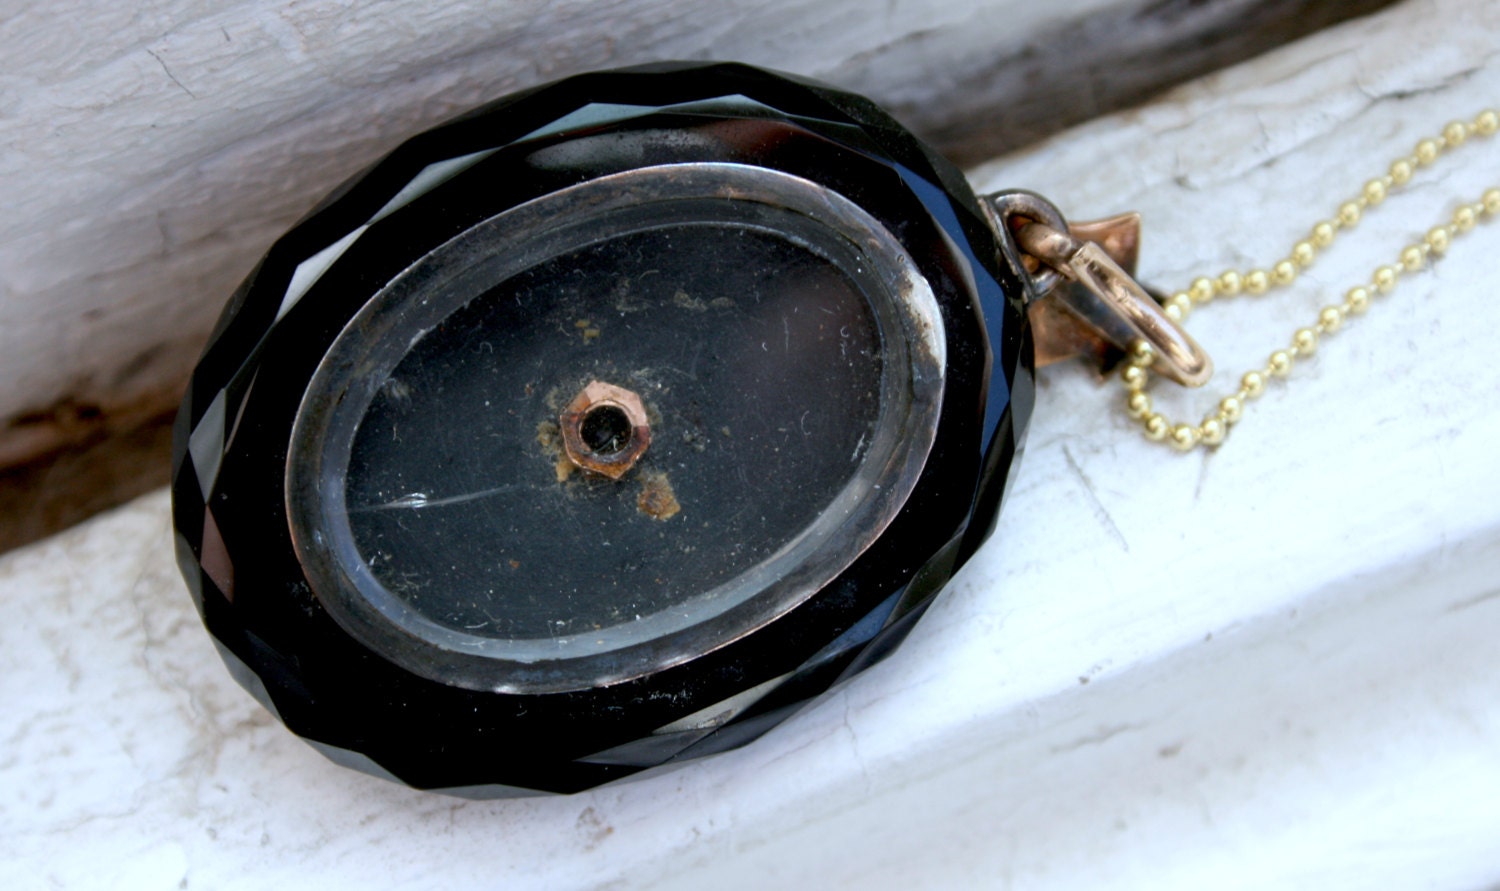 Antique Victorian 14K Yellow Gold Pendant Locket with Onyx, Pearls, and Enamel.